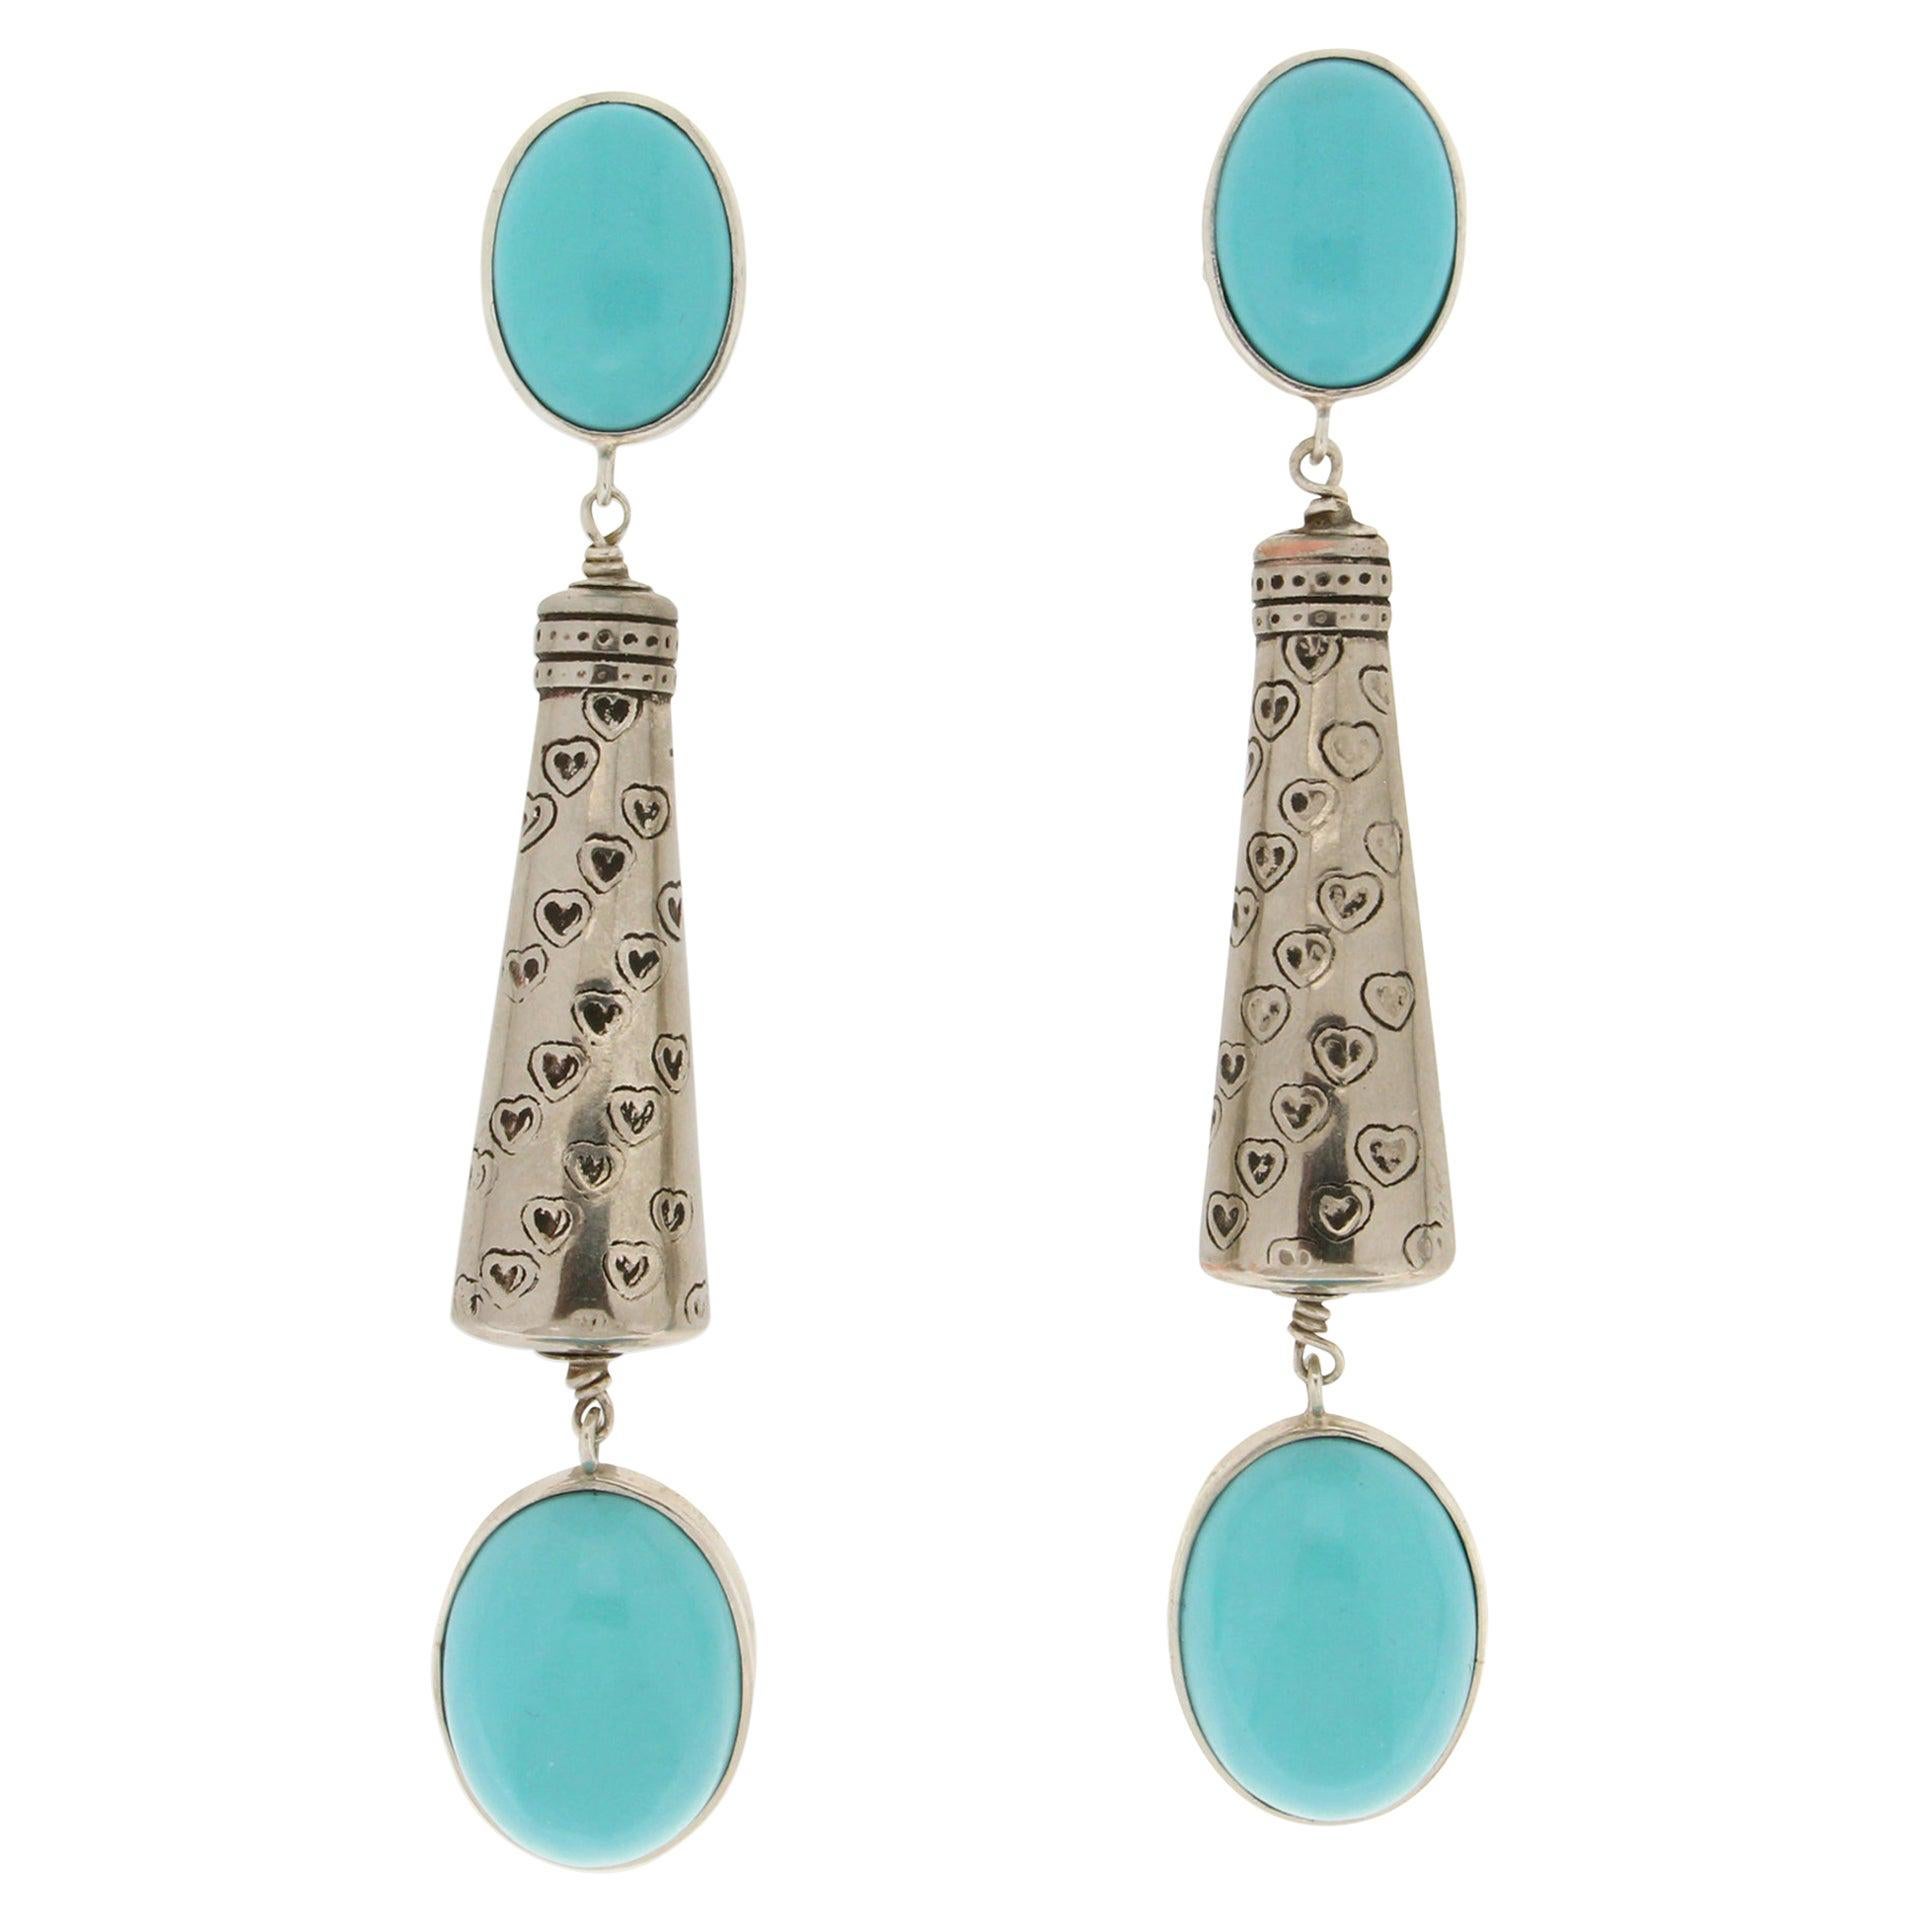 Handcraft Turquoise Paste 800 Thousandths Silver Drop Earrings